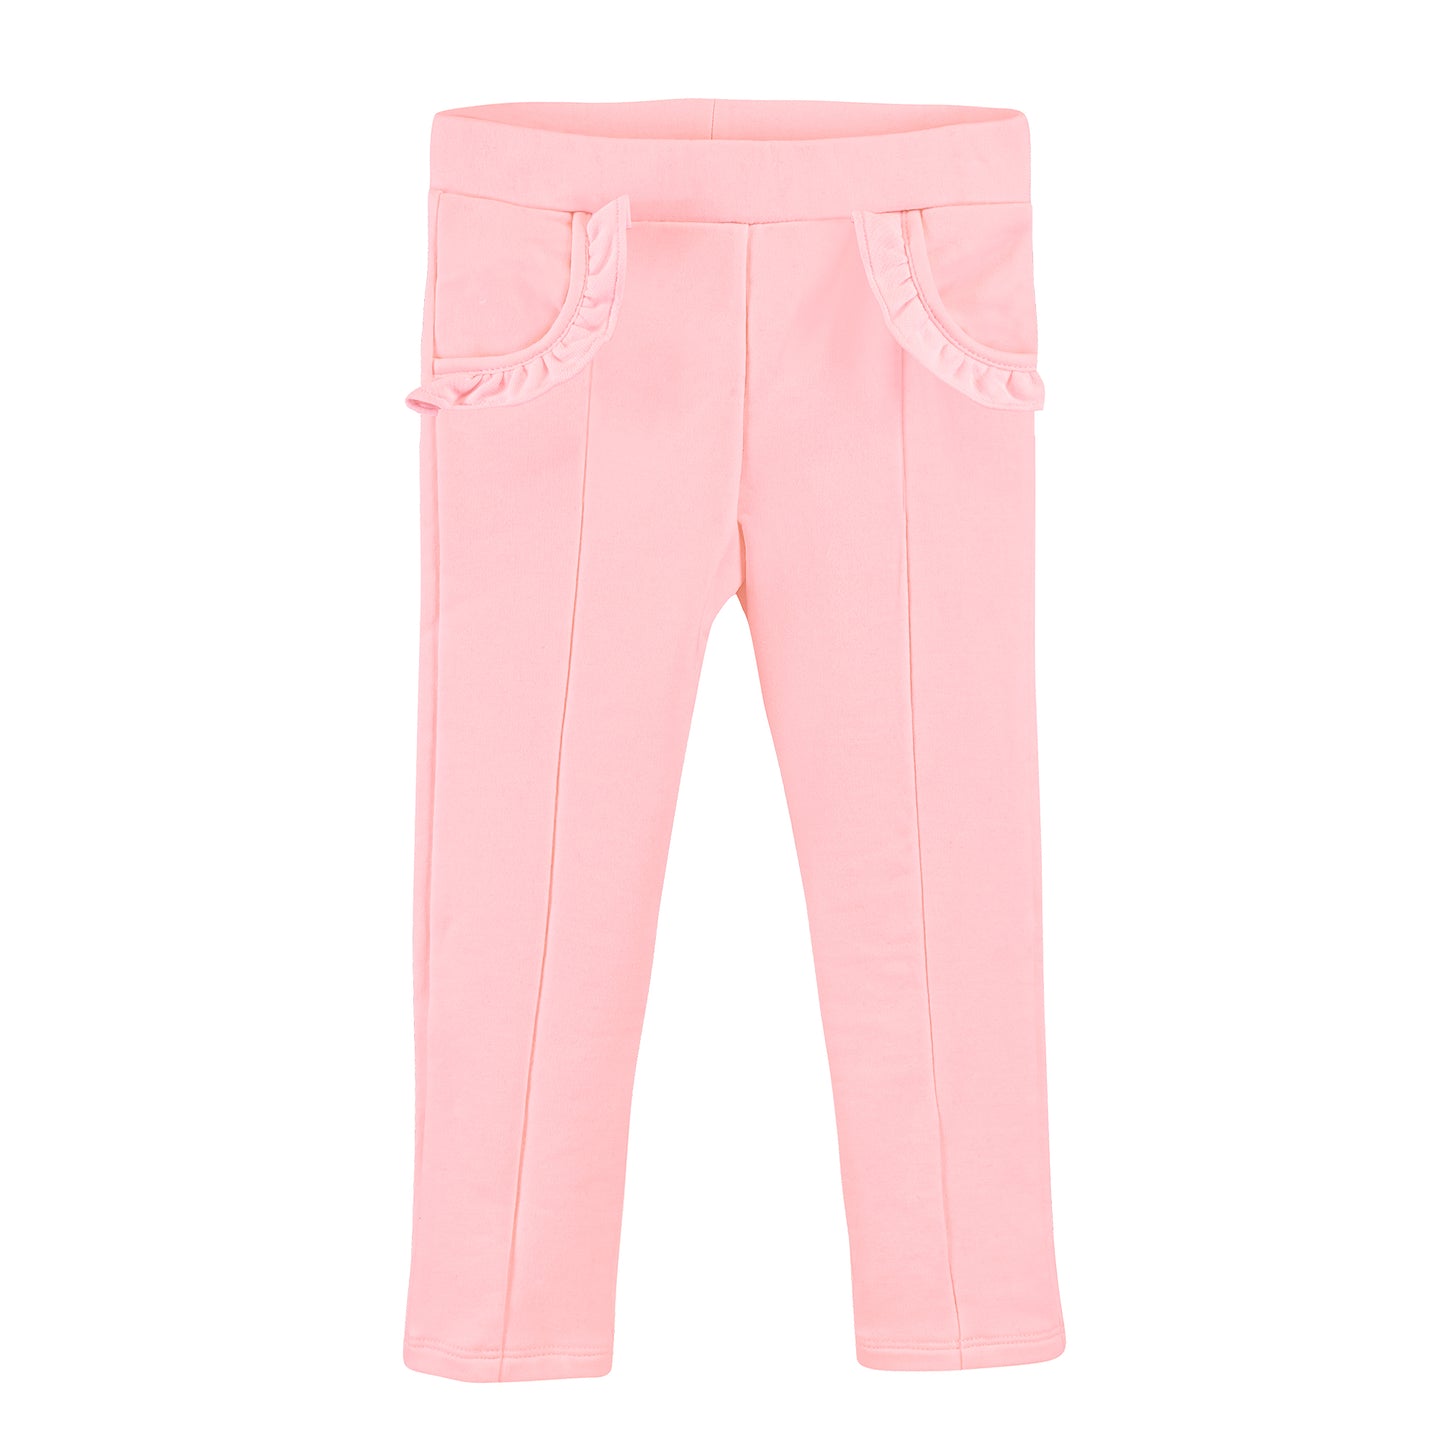 Pink Pants with Ruffle Pocket